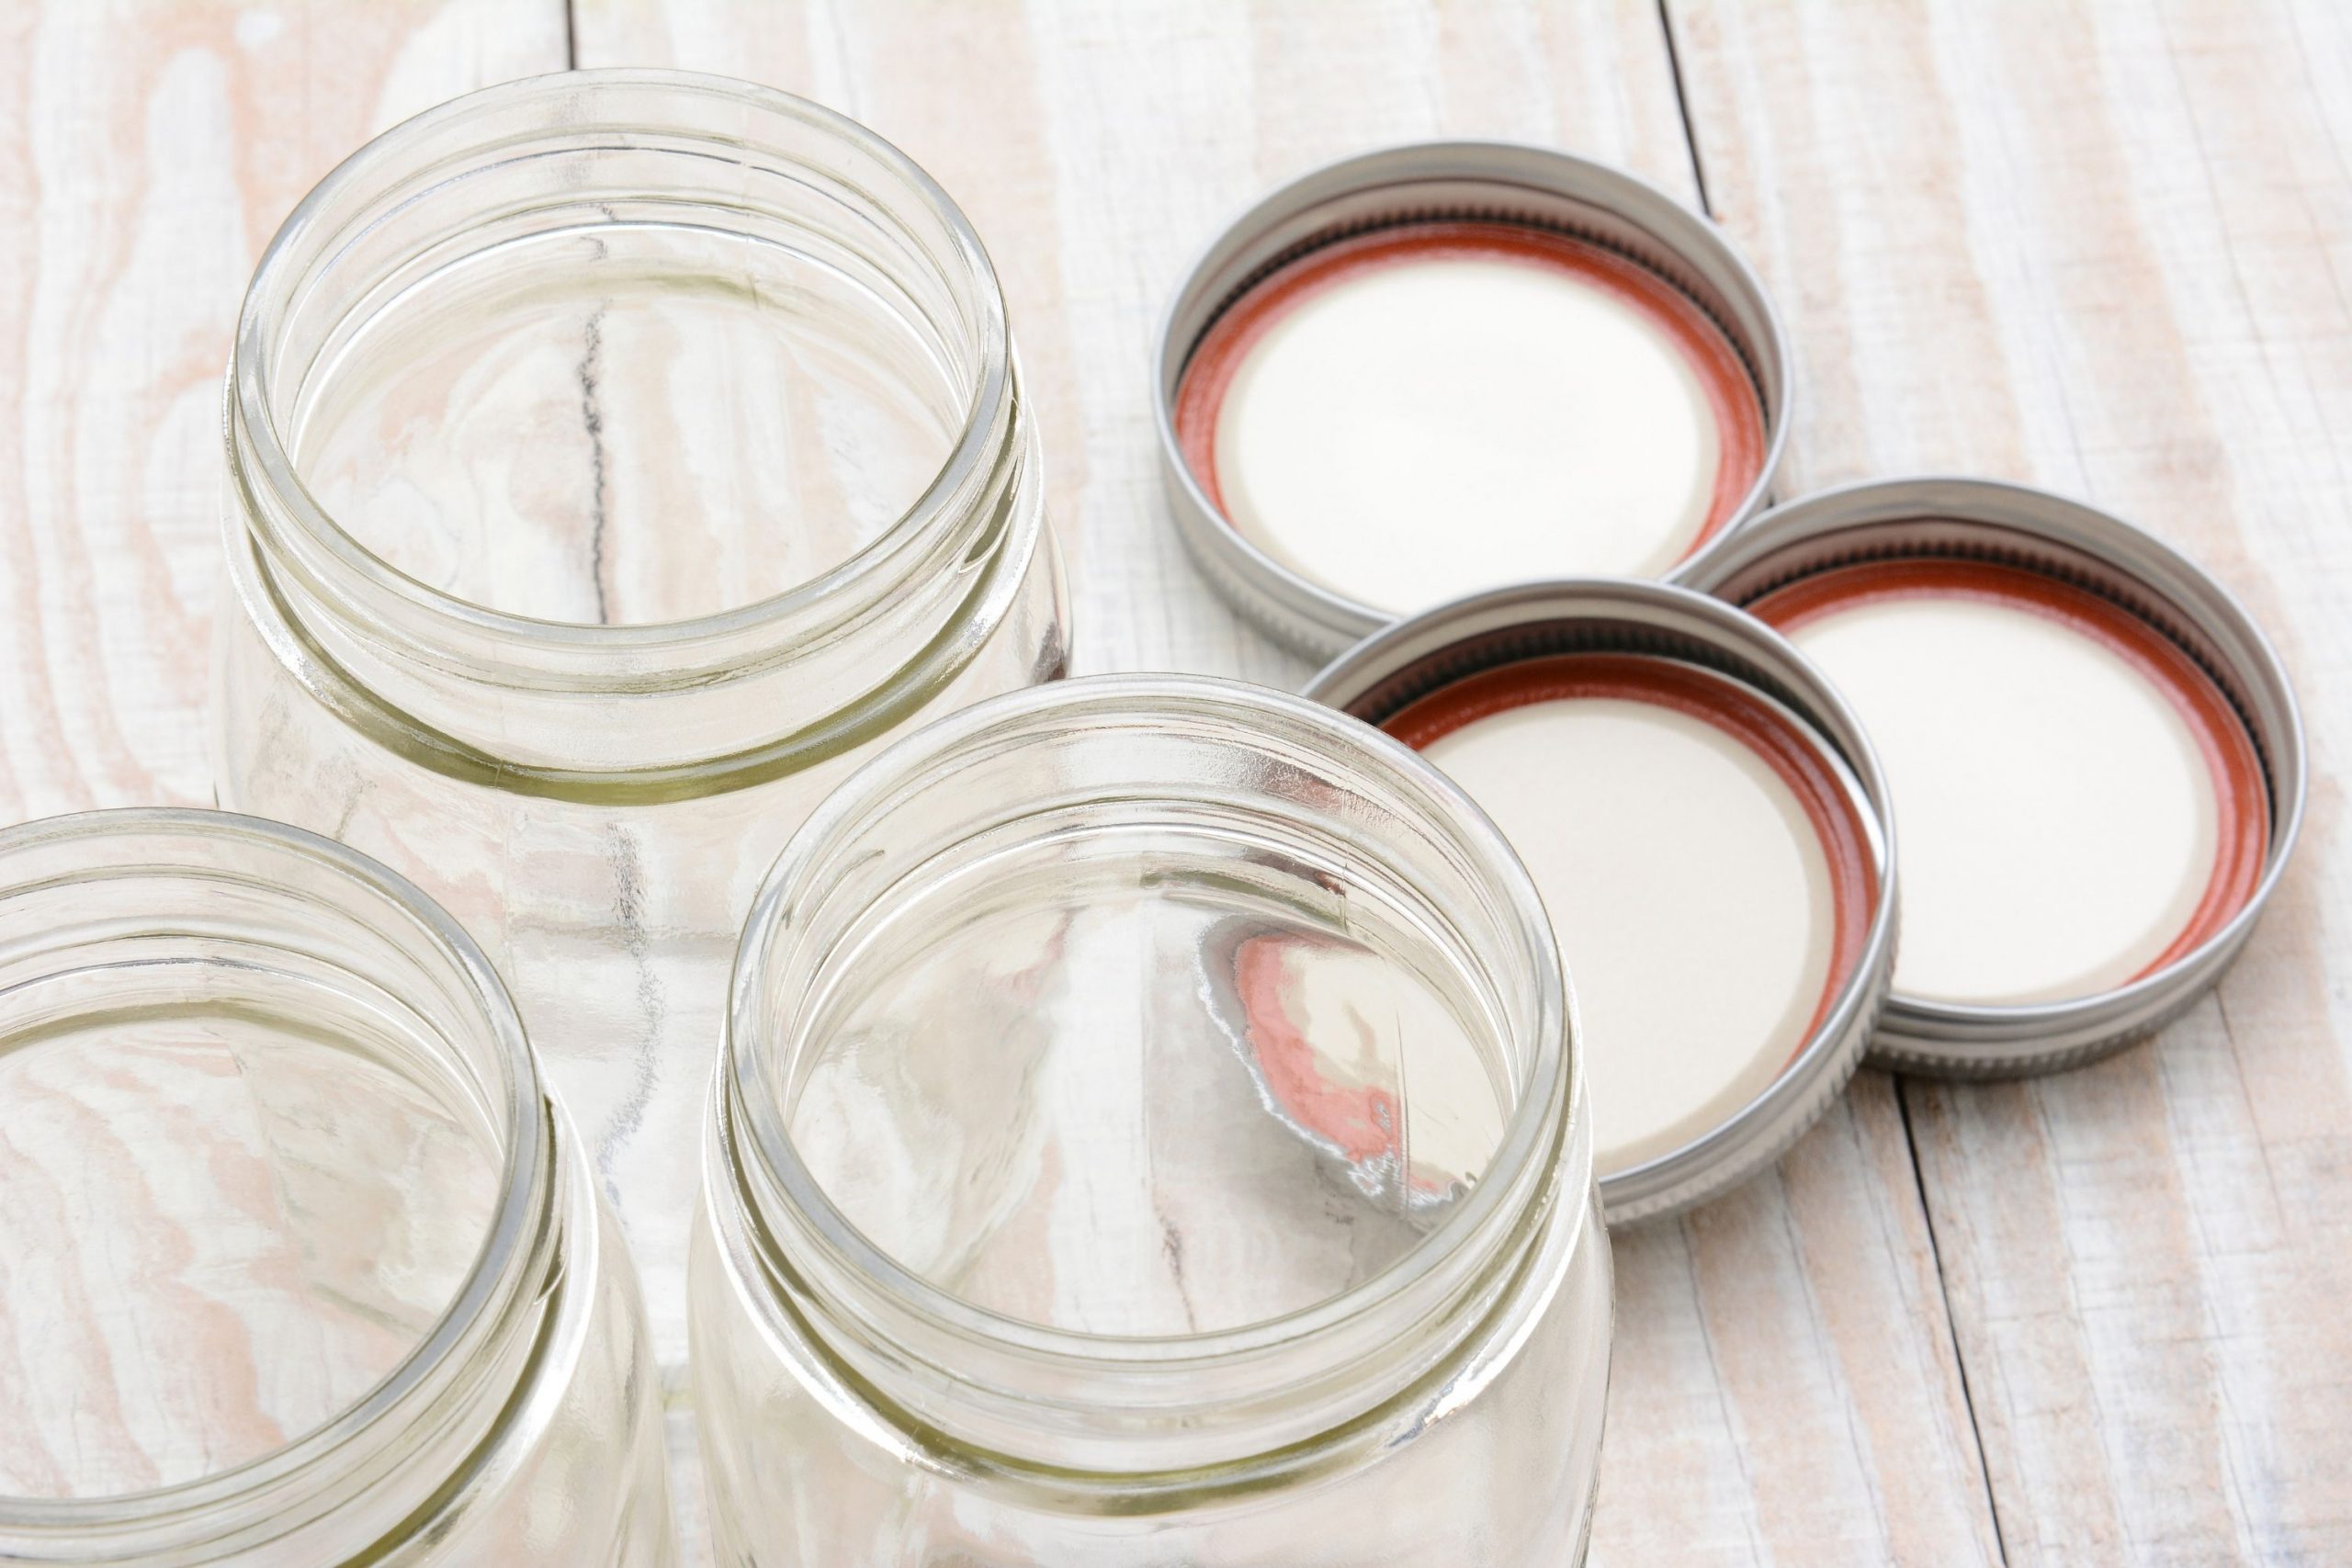 How to Remove Rust From Canning Jar Rings